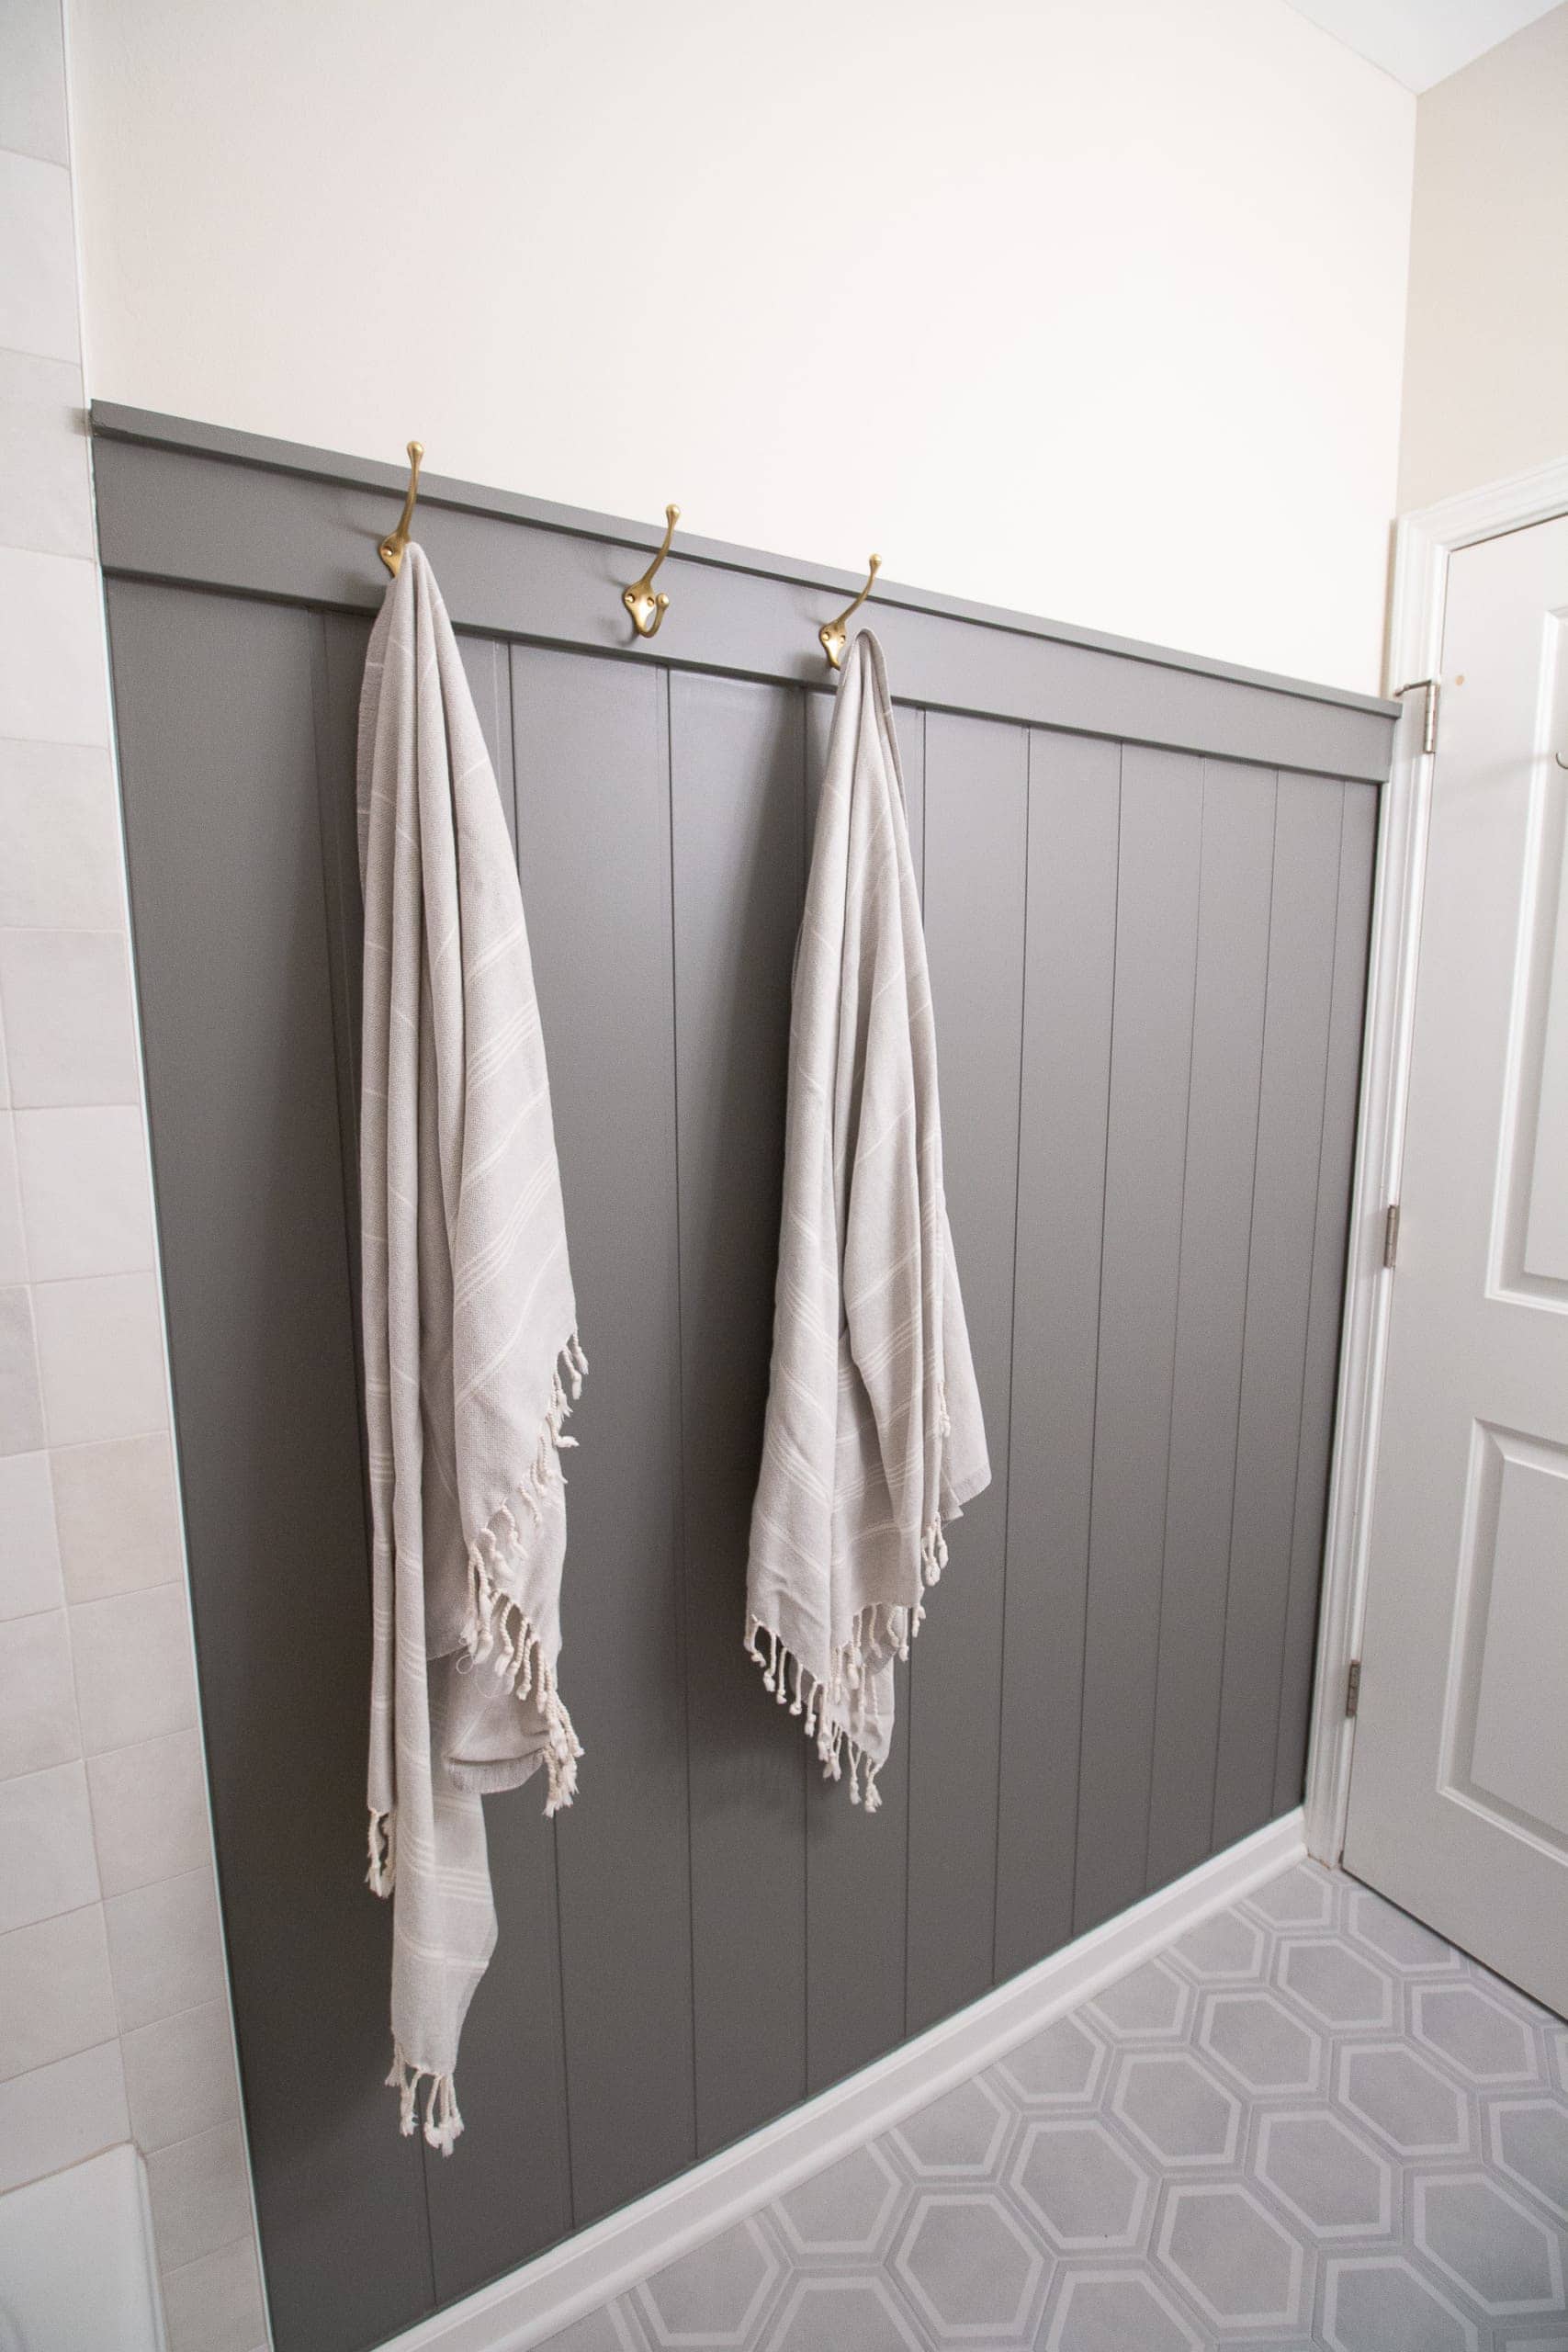 Add a wood wall treatment to your small bathroom for extra storage